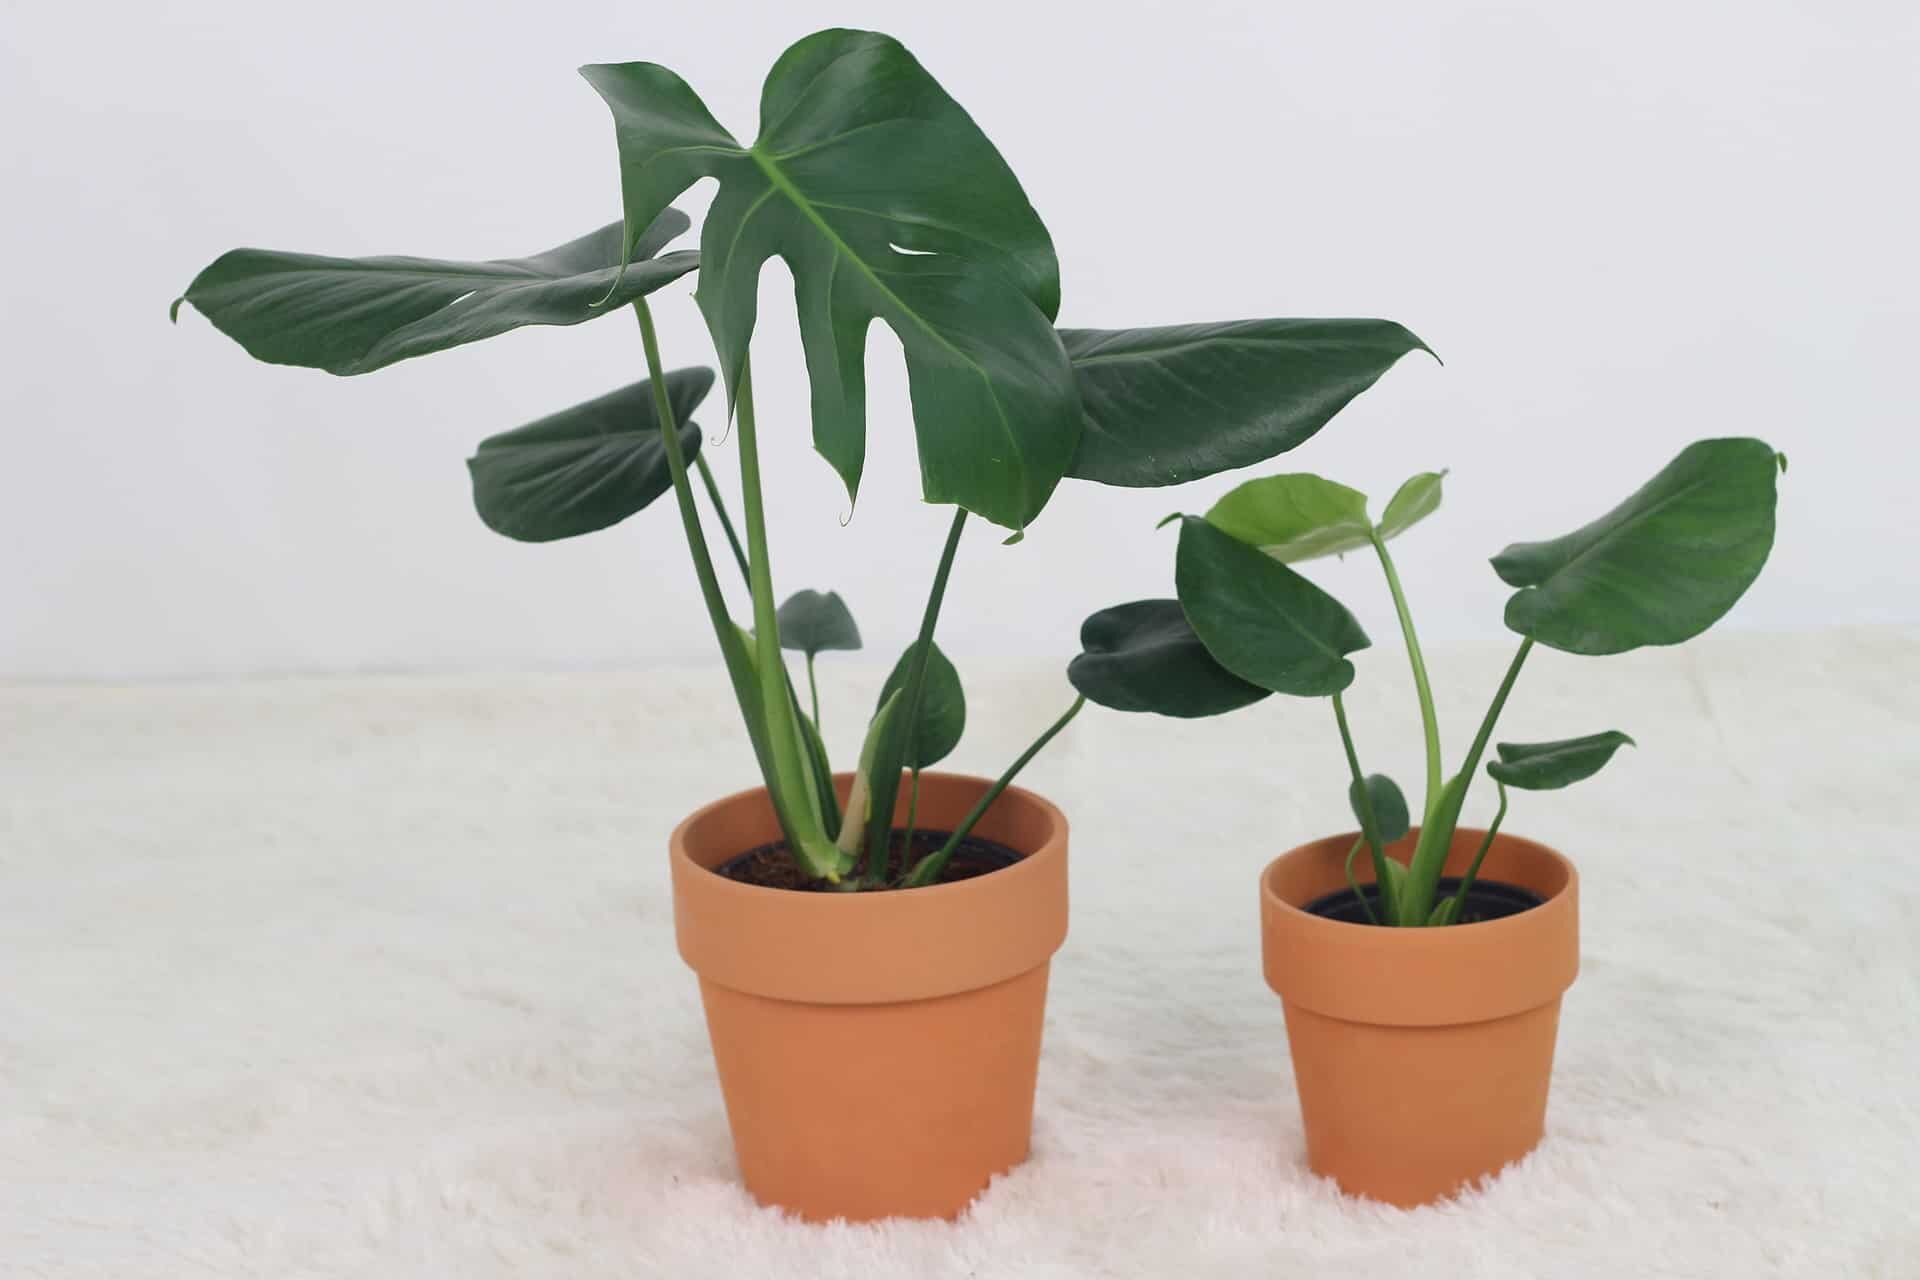 How to Water Monstera Deliciosa Plants